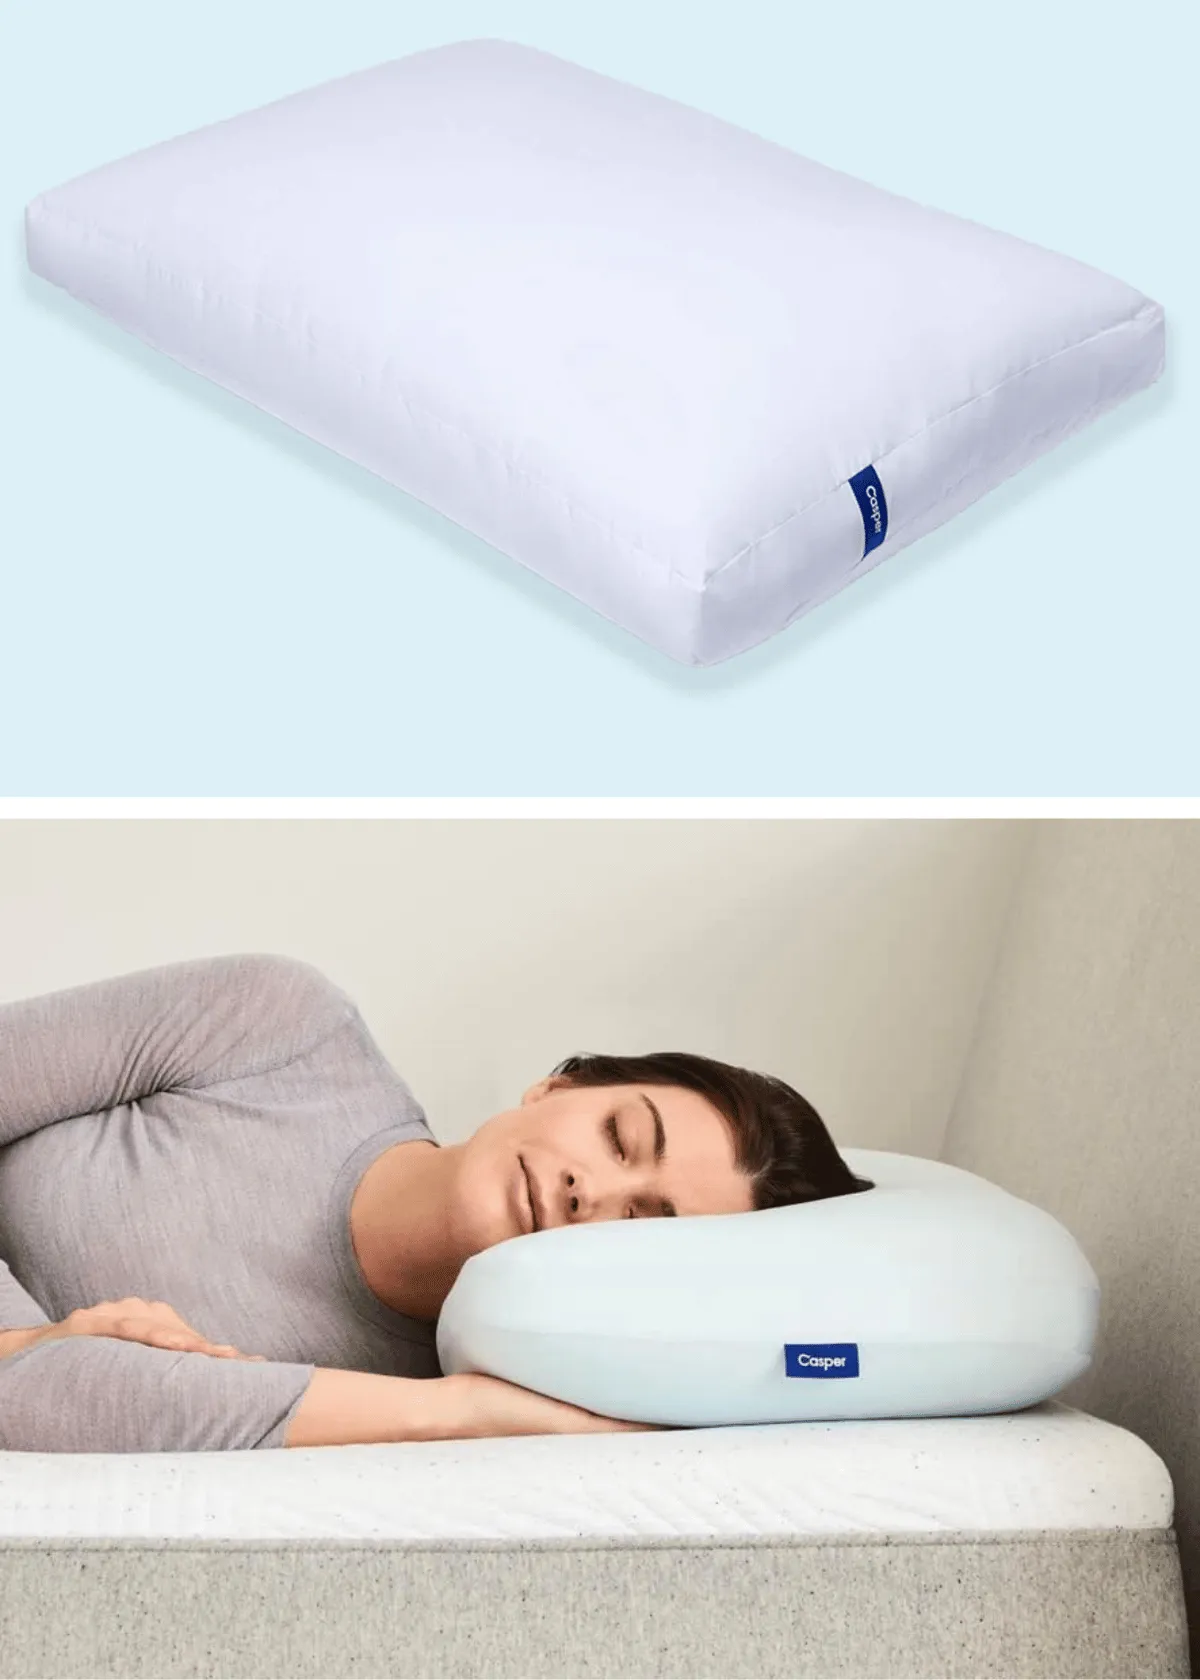 "How to Choose the Best Casper Pillow For a Comfy Night's Sleep?"